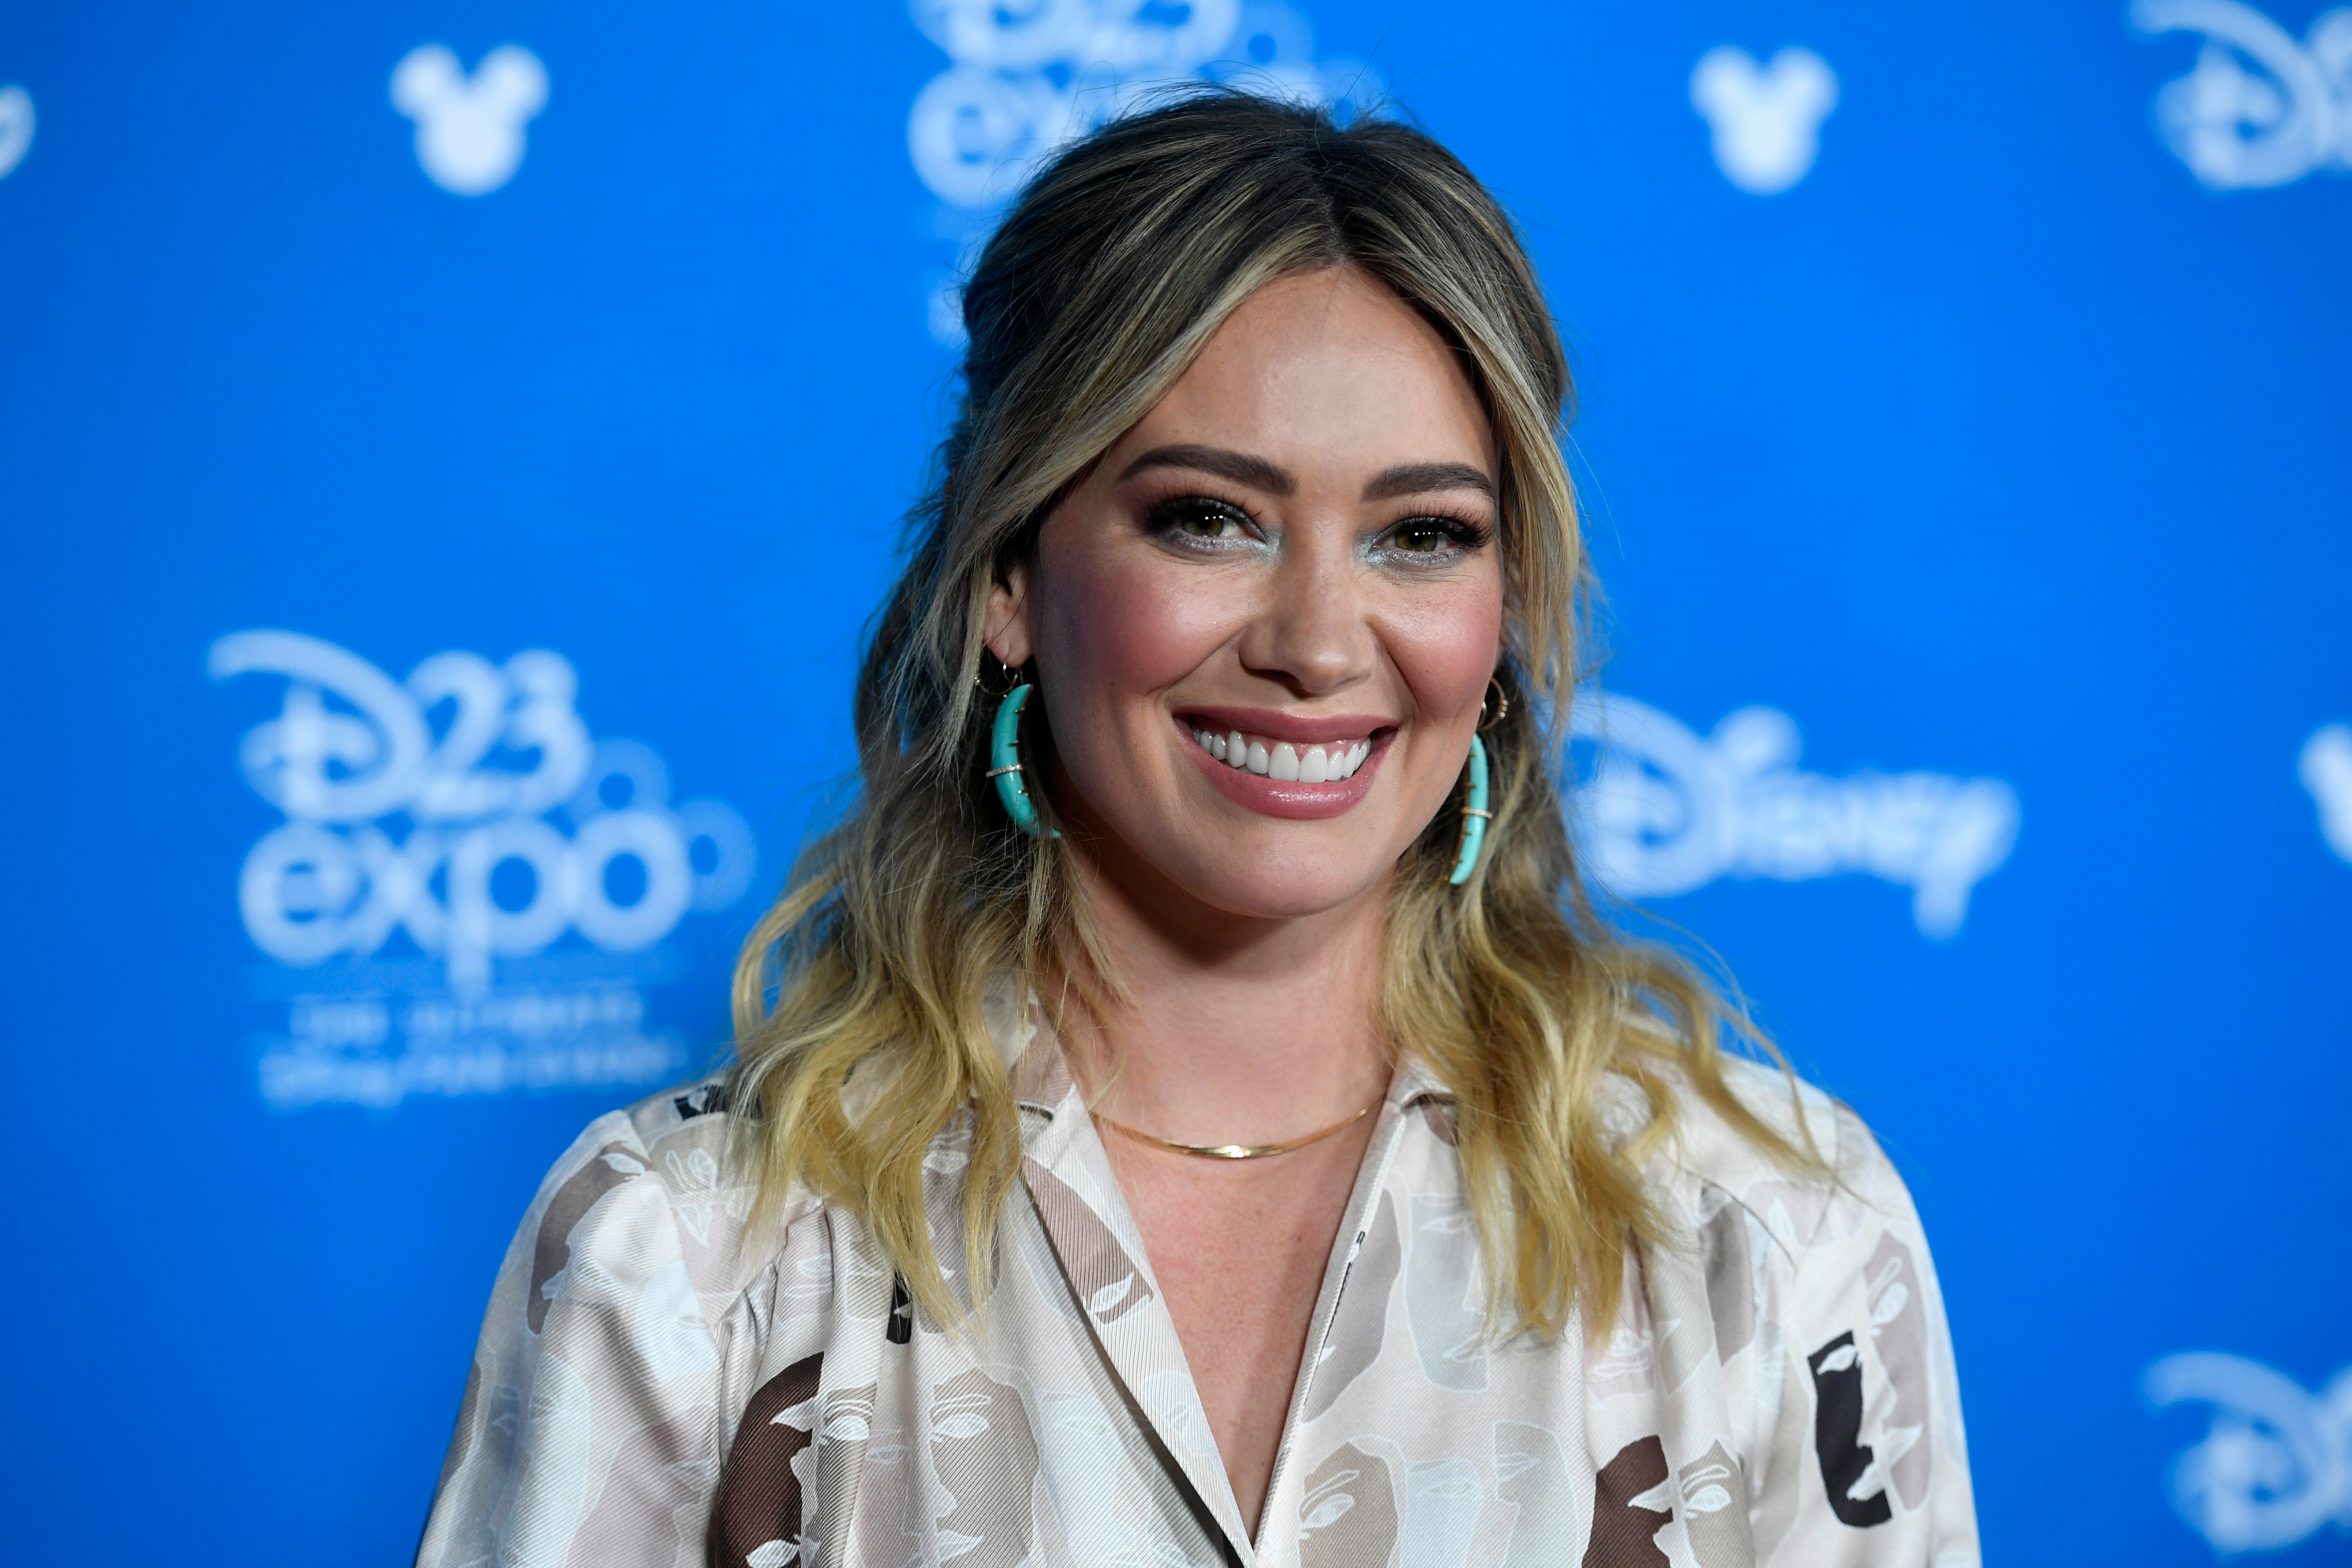 Hilary Duff Just Debuted Her Lizzie Mcguire Blonde Hair